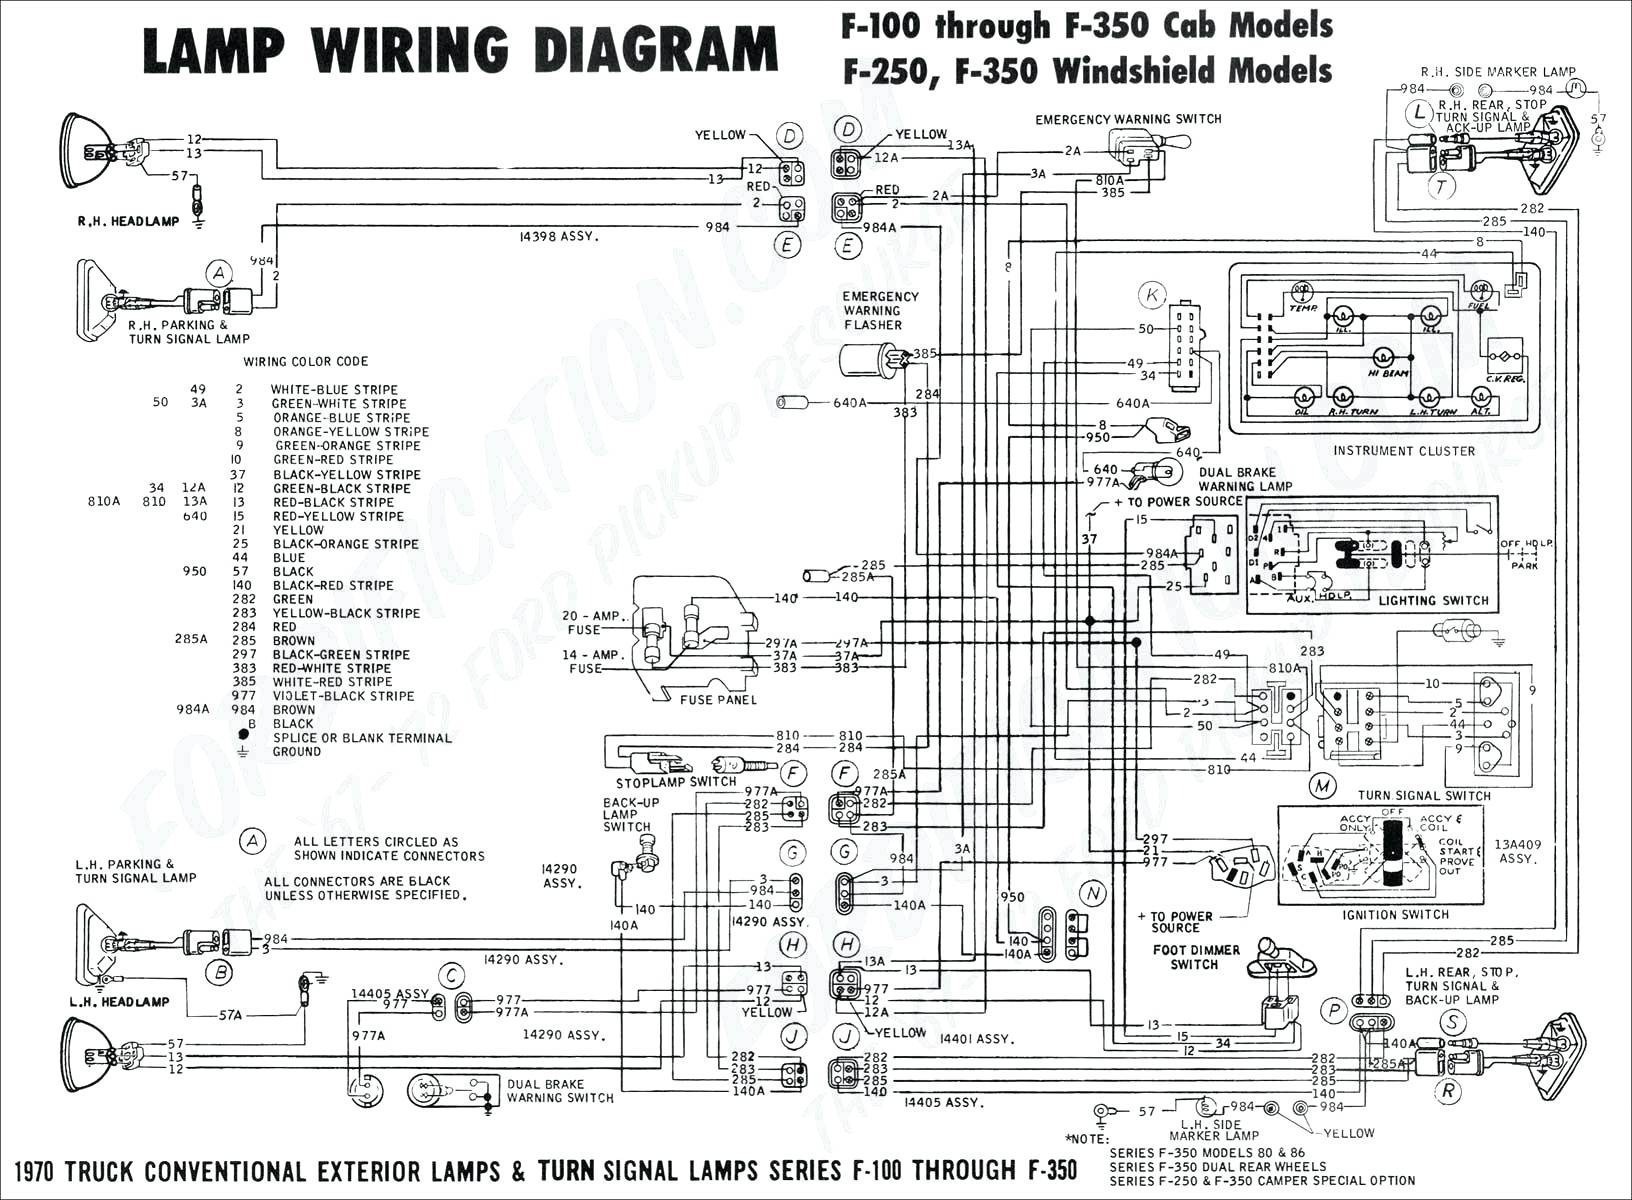 Wiring Diagram for Car Trailer New Wiring Diagrams for Utility Trailer Valid Trailer Light Wiring